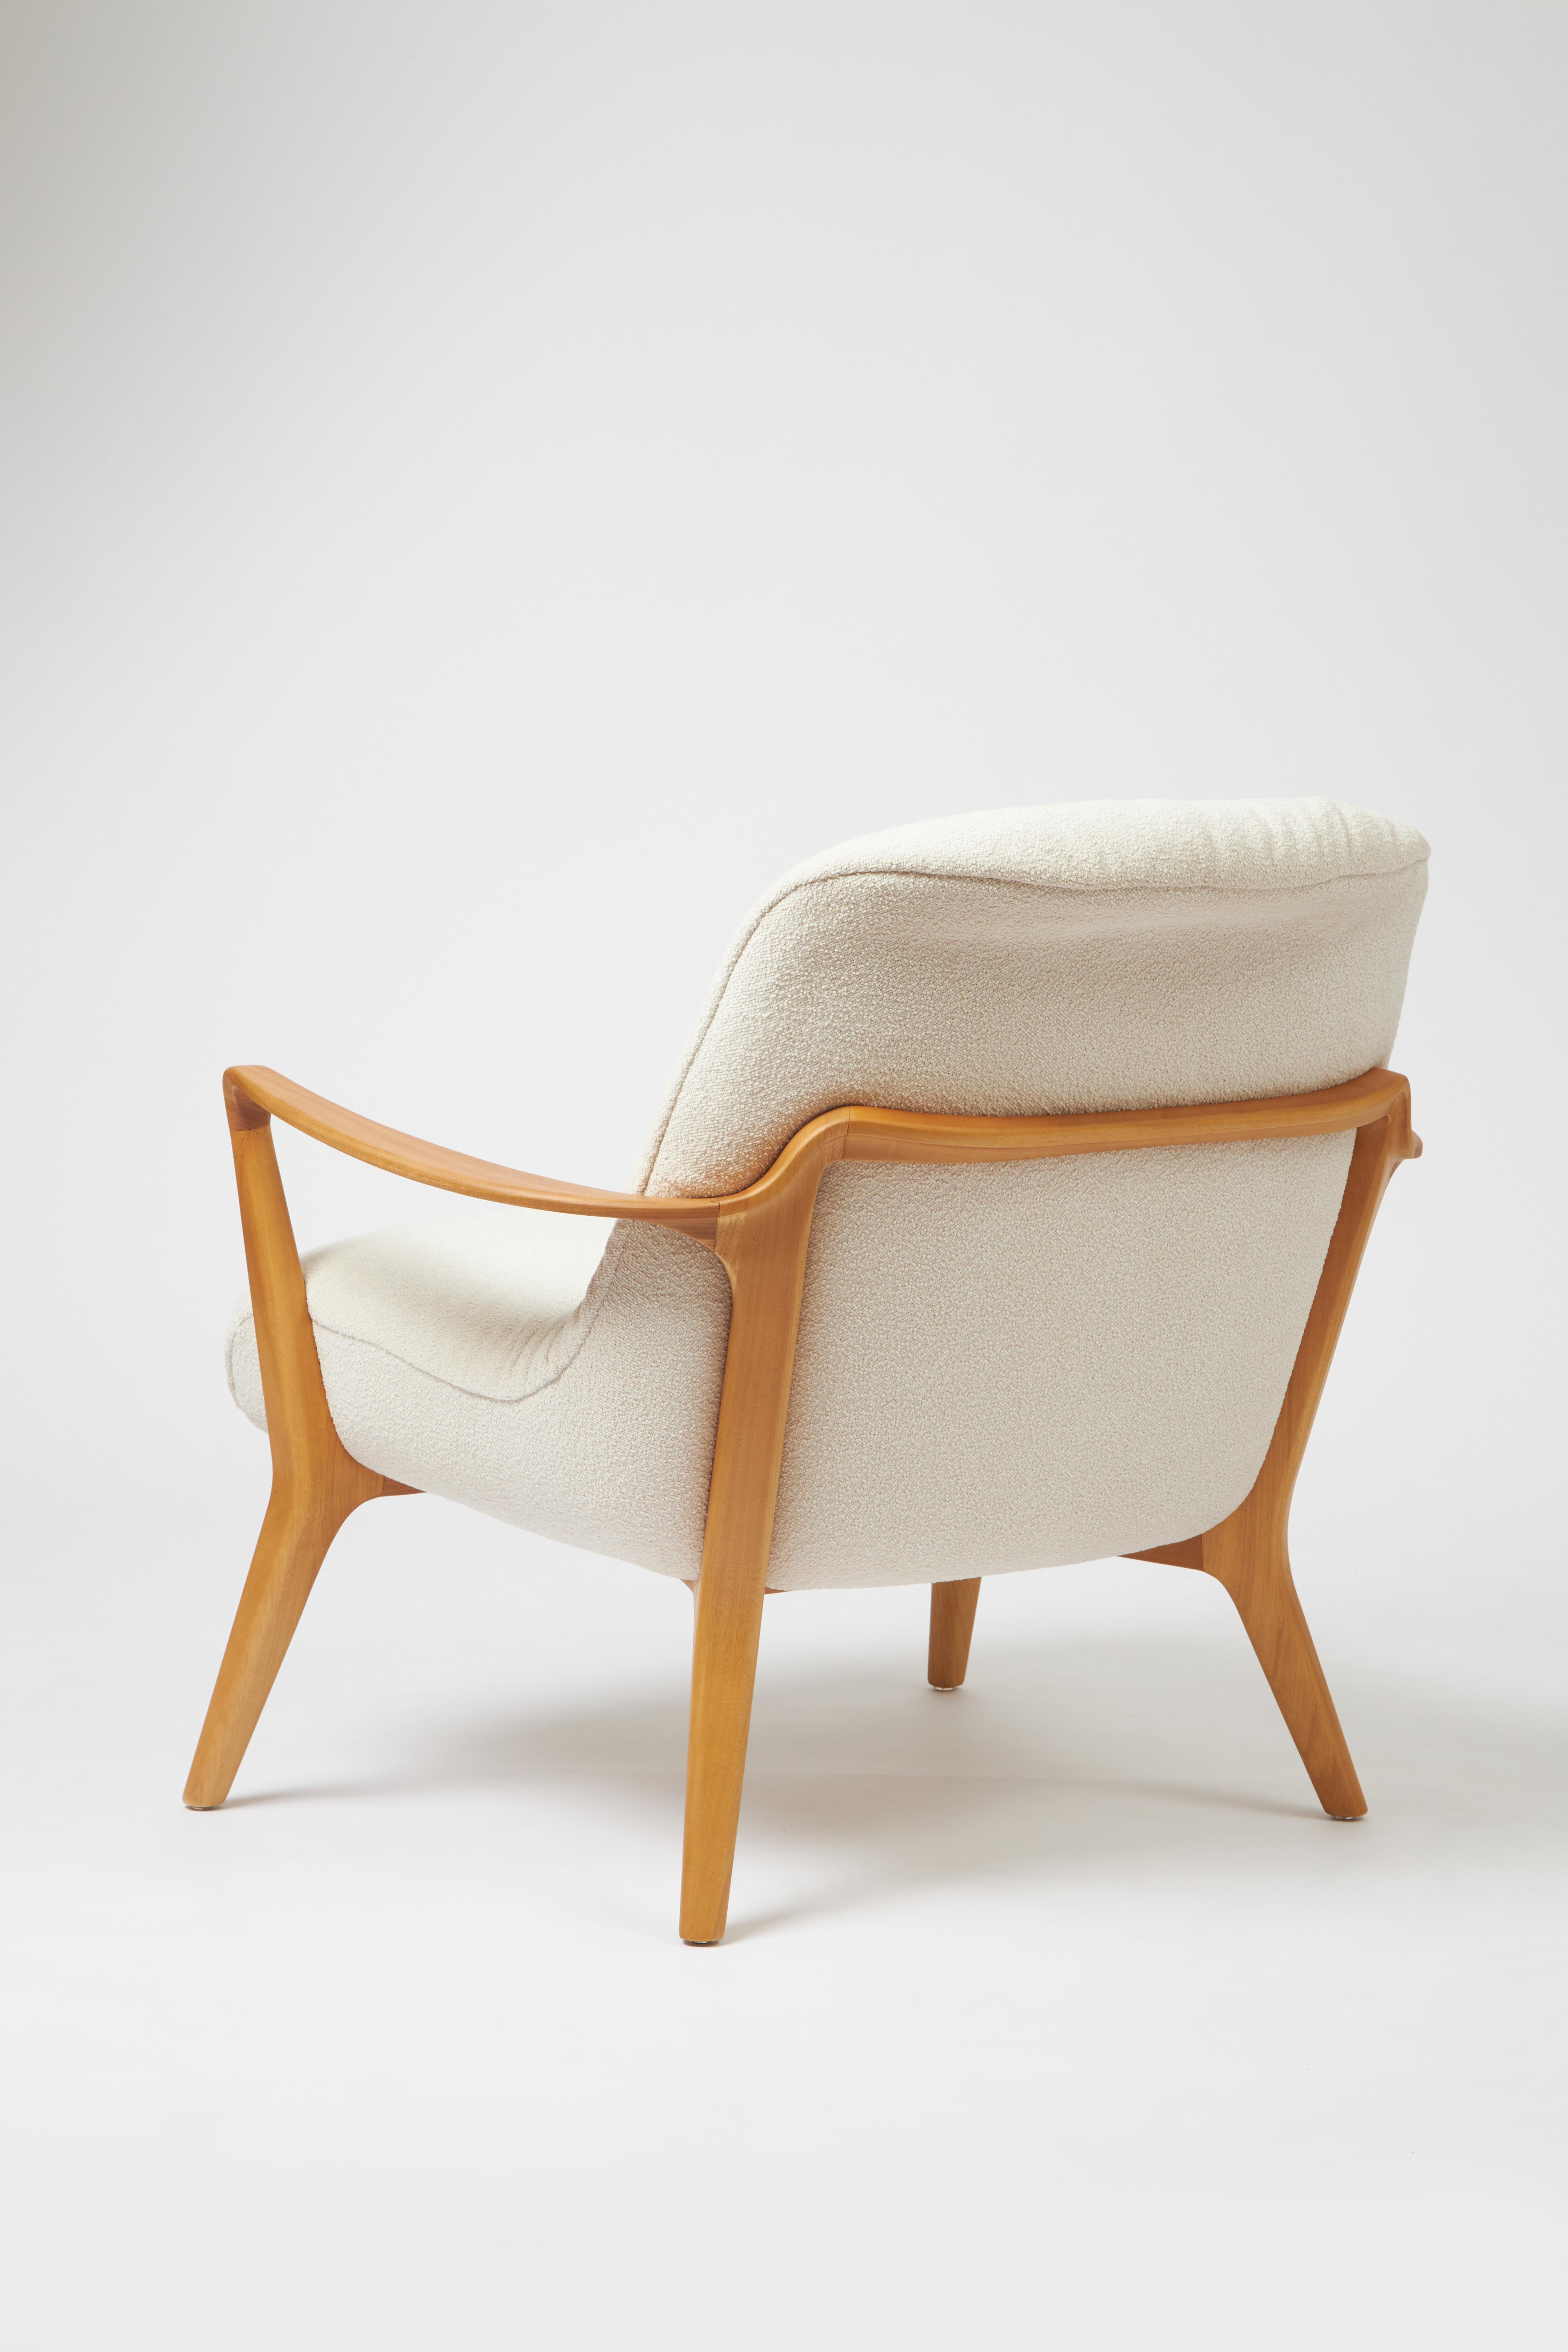 Brazilian Minimal Style Insigne Armchair Sculpted in solid wood, textiles seating For Sale